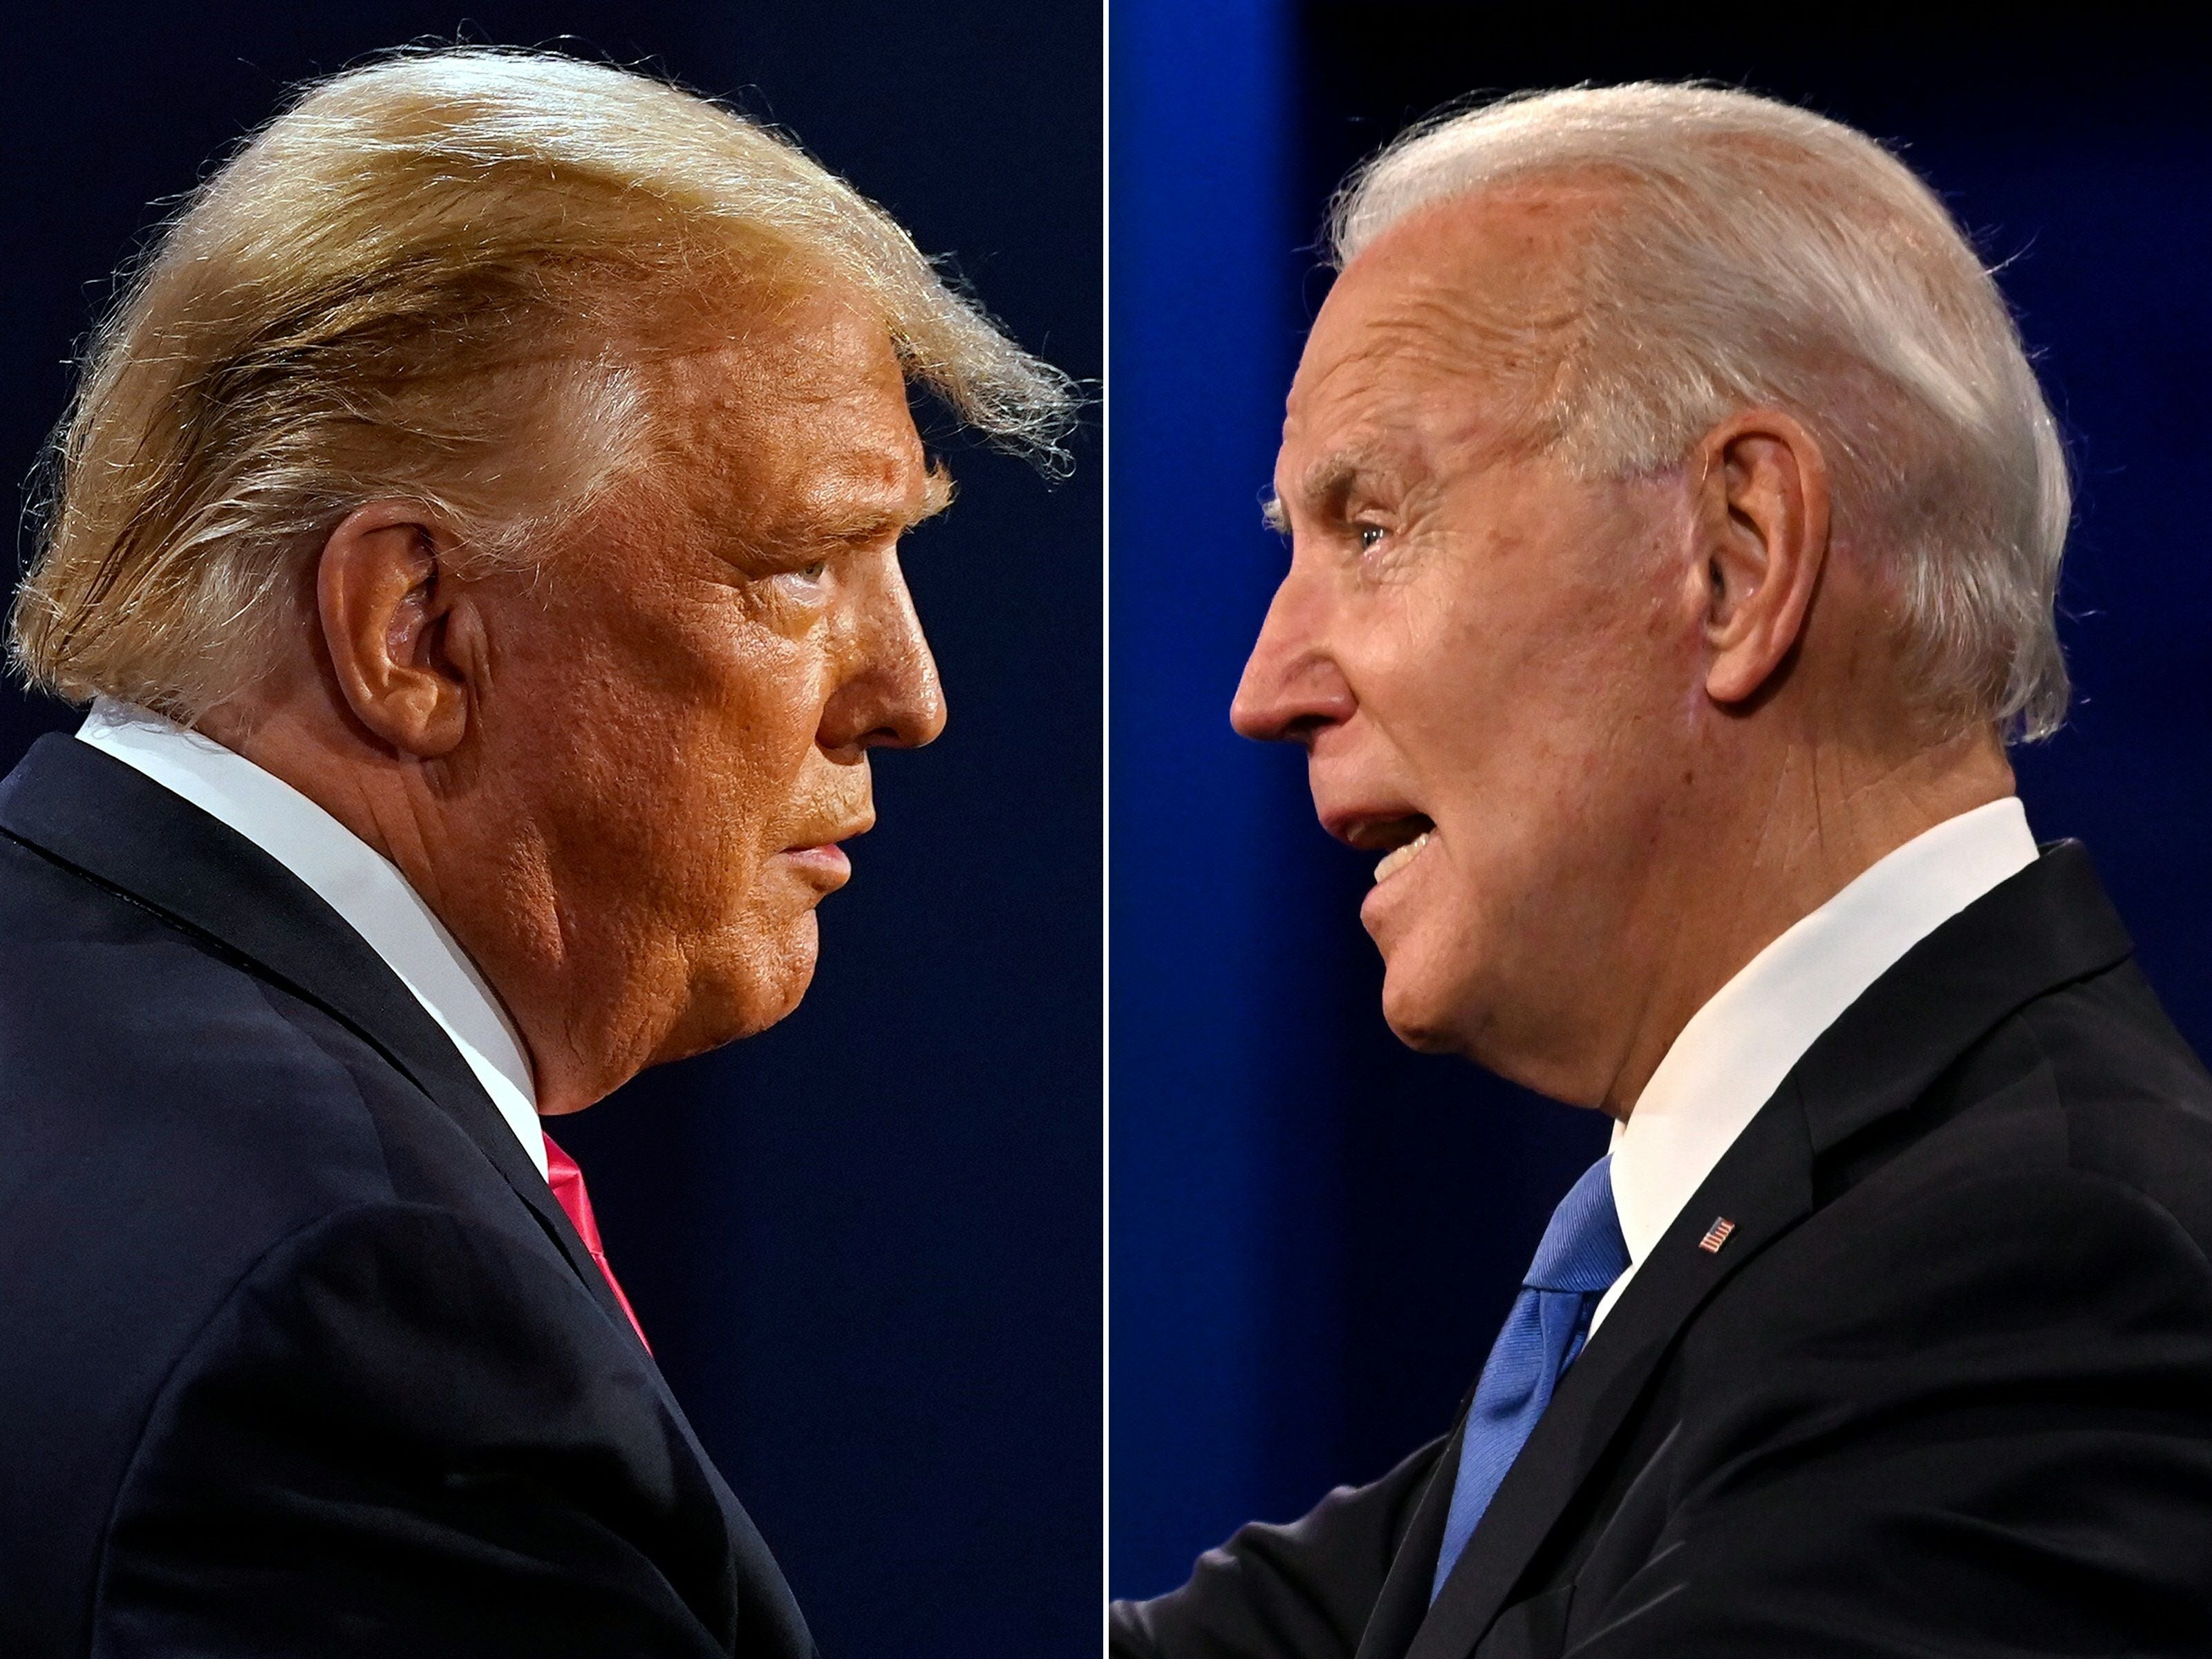 Trump’s rally on Biden’s election day includes grand preparations